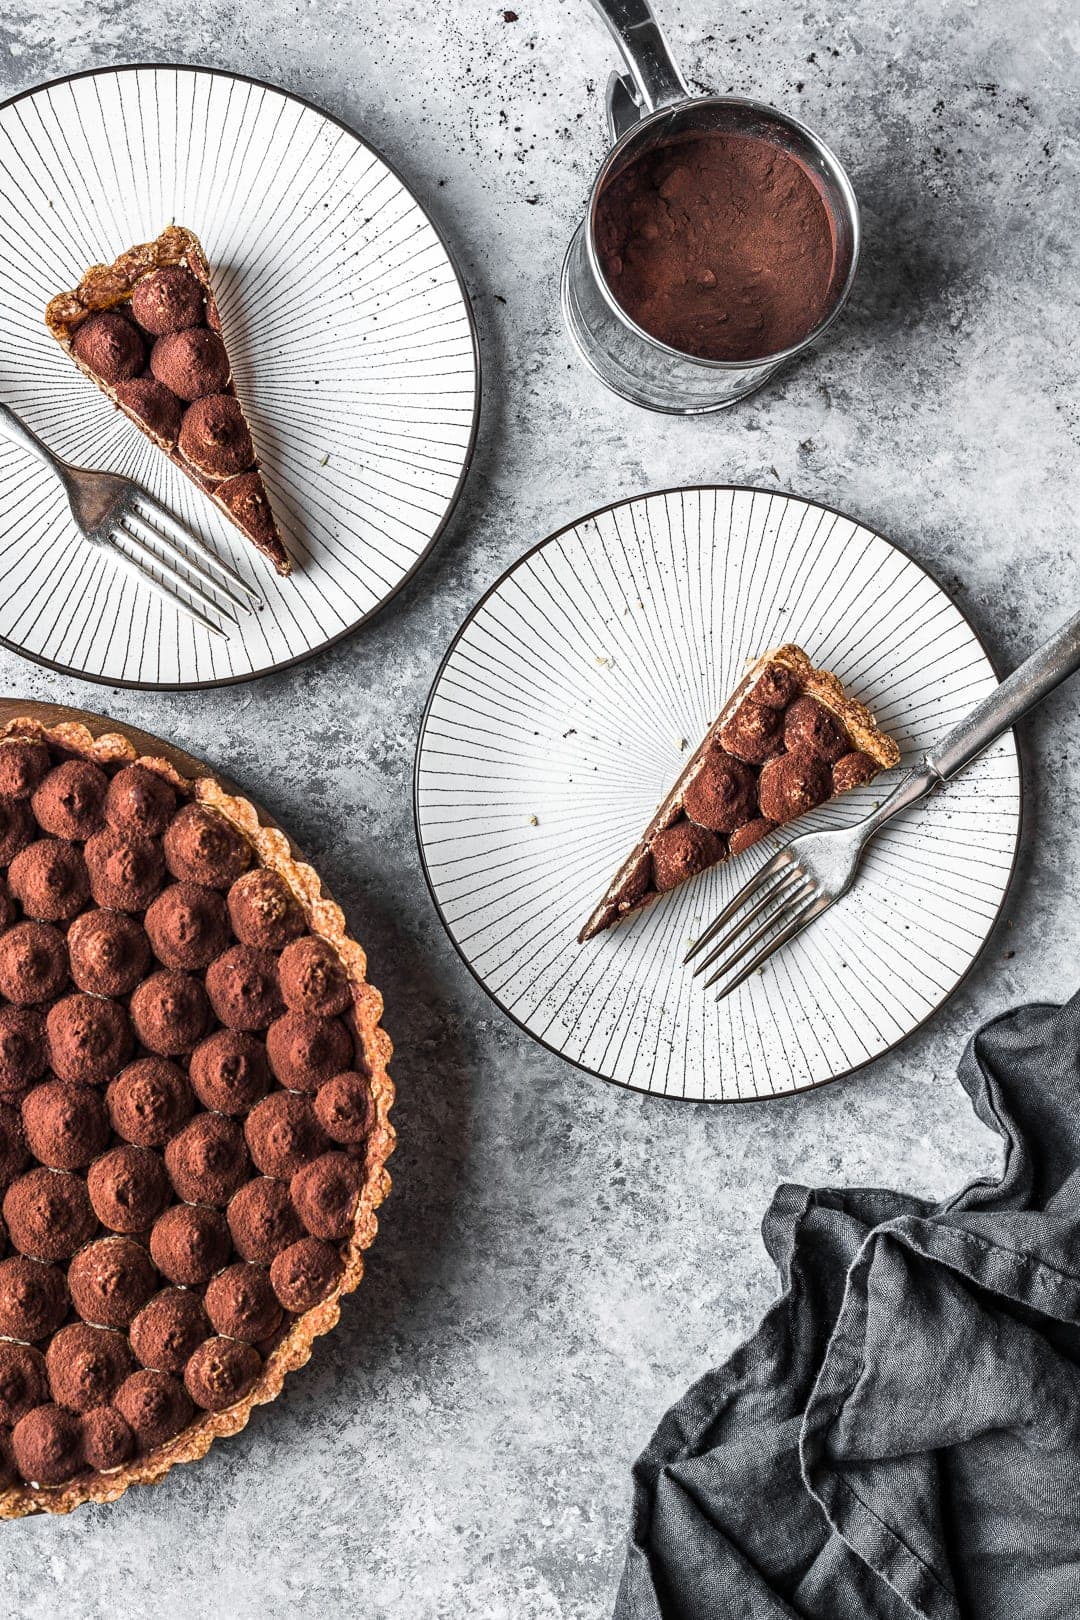 Two slices of tart on plates with rest of tart and sifter of cocoa powder nearby